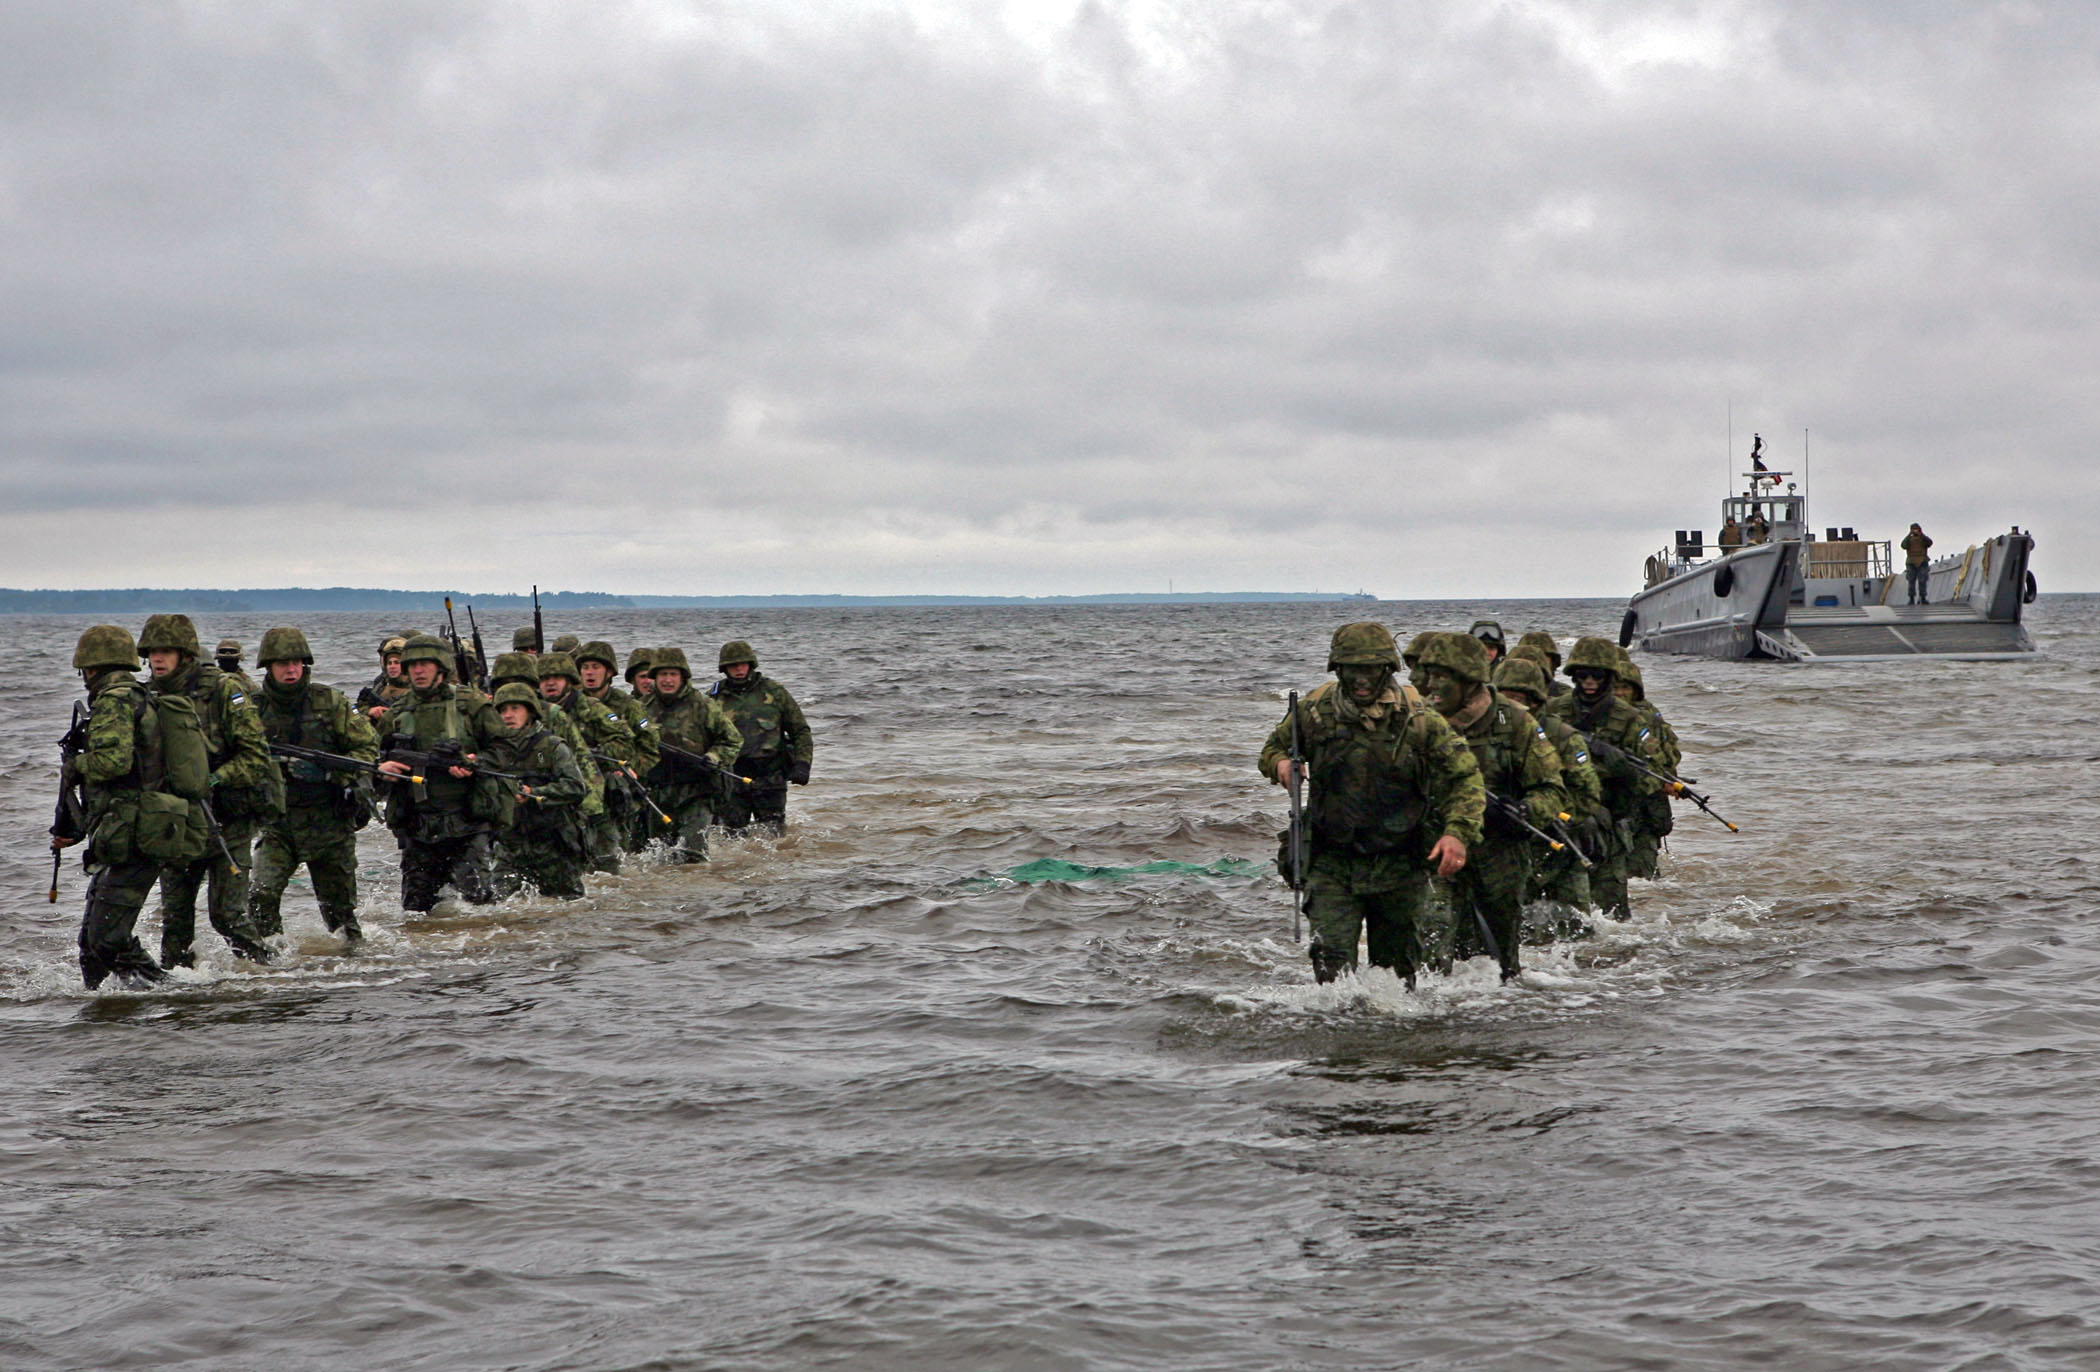 100615-M-0884D-033 LOSKA, Estonia (June 15, 2010) Estonian soldiers wade ashore during a combined U.S. and Estonia amphibious assault training exercise during Baltic Operations (BALTOPS) 2010. BALTOPS is an annual exercise to improve interoperability and cooperation among regional allies by conducting realistic training with the 12 participating nations. (U.S. Marine Corps photo by Sgt. Rocco DeFilippis/Released)